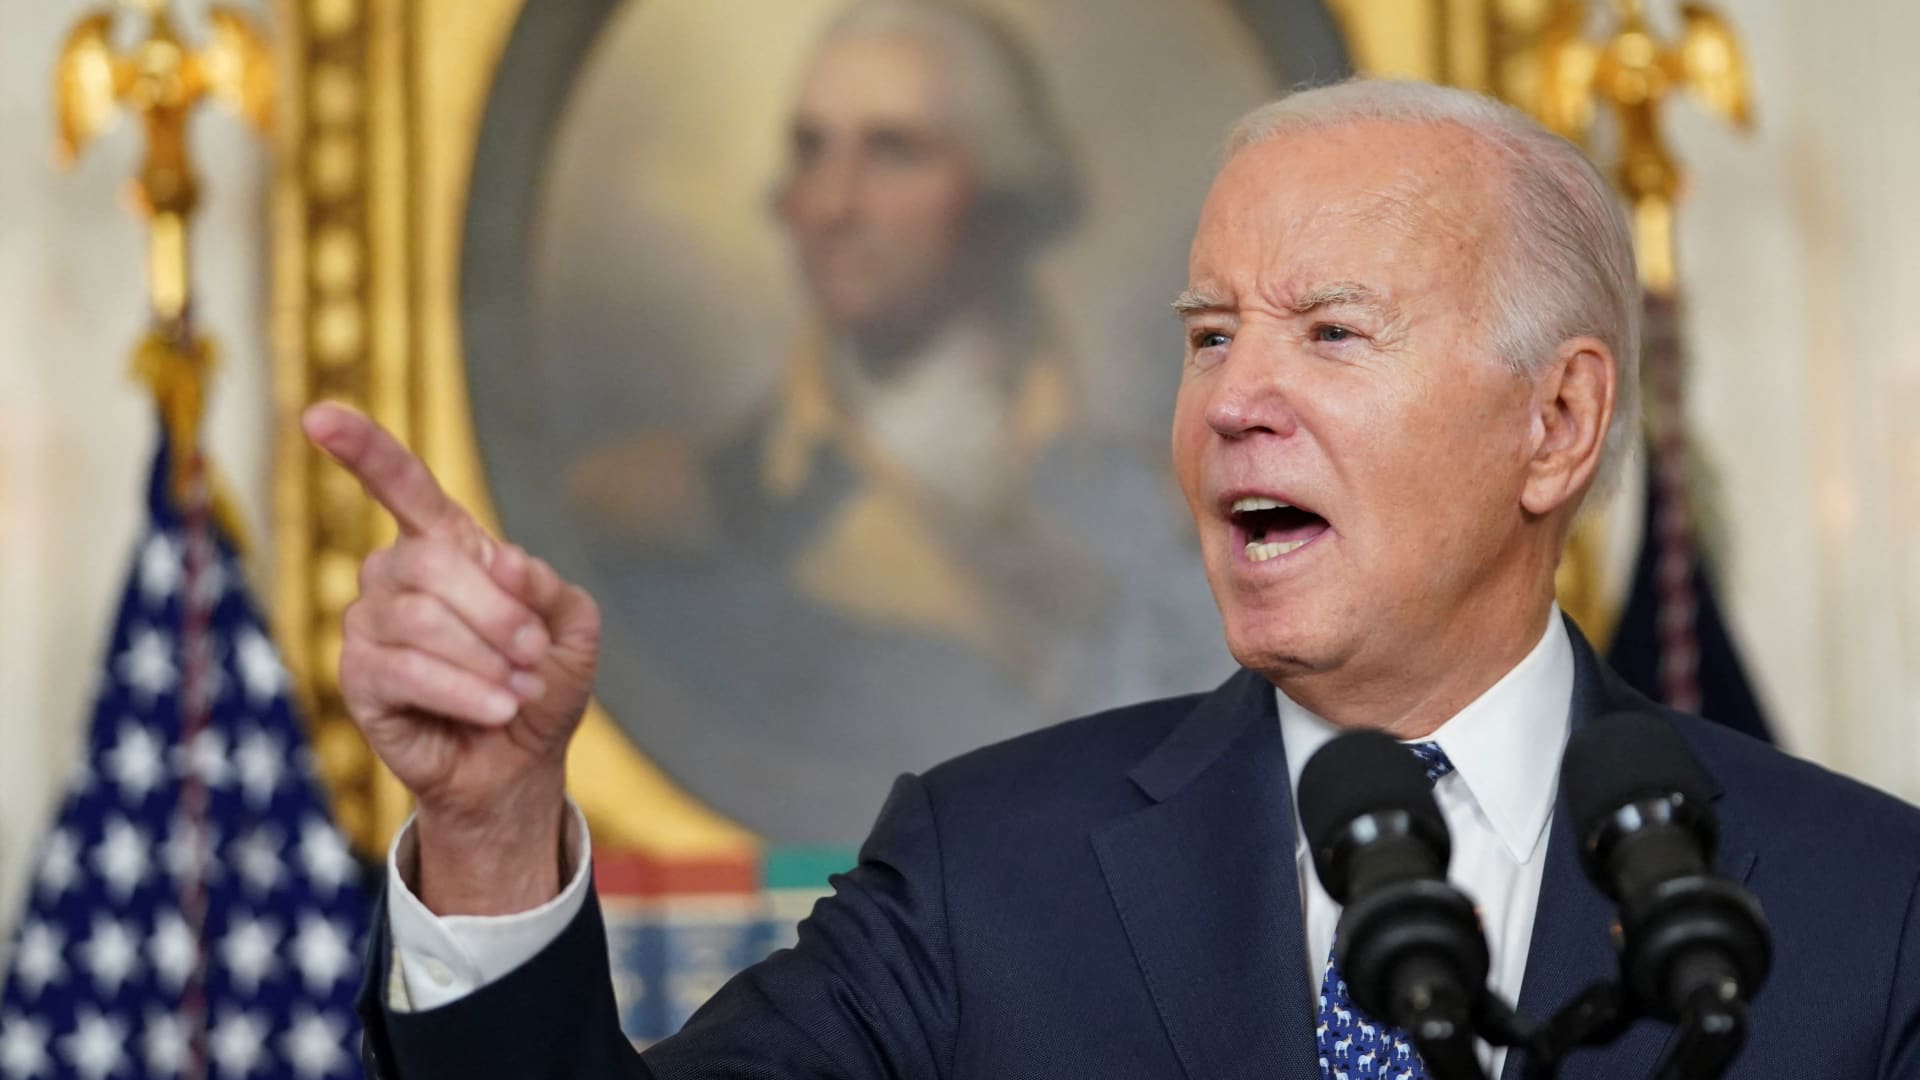 Biden campaign co-chair fires back at speculation on the president's mental capacity